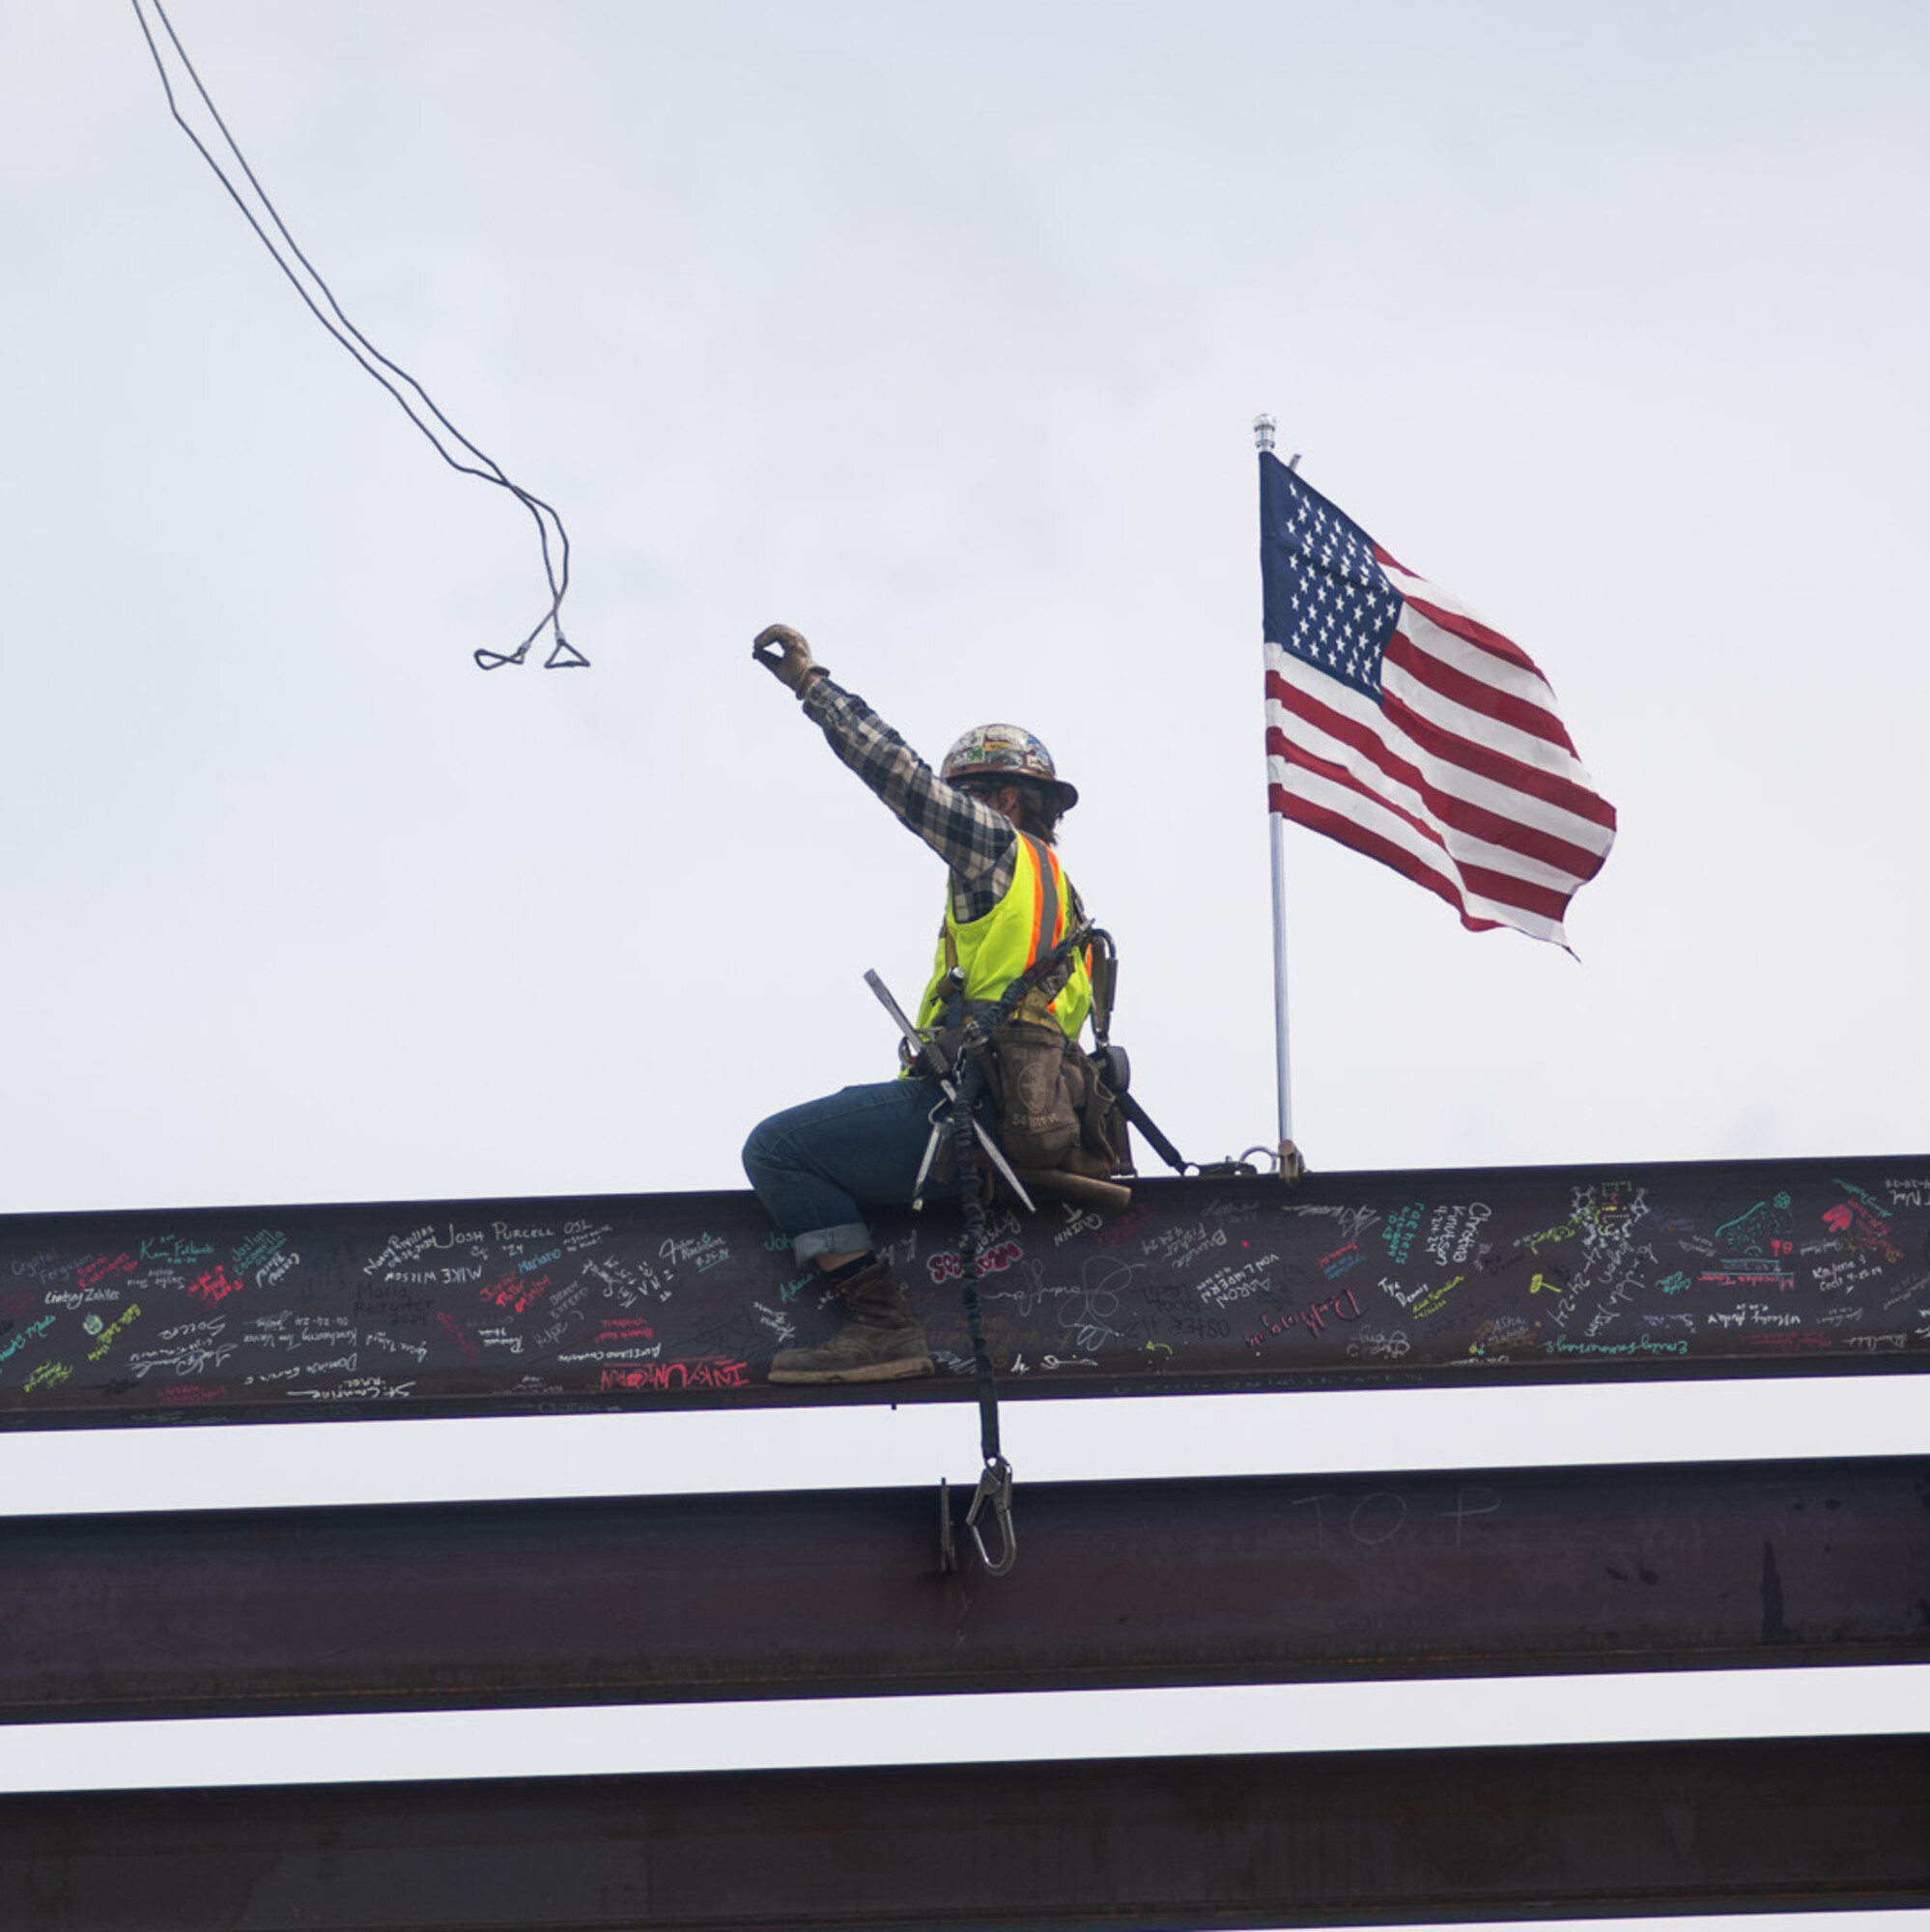 A construction worker throws off a wire attached to a crane that just lowered a beam onto a building's frame.